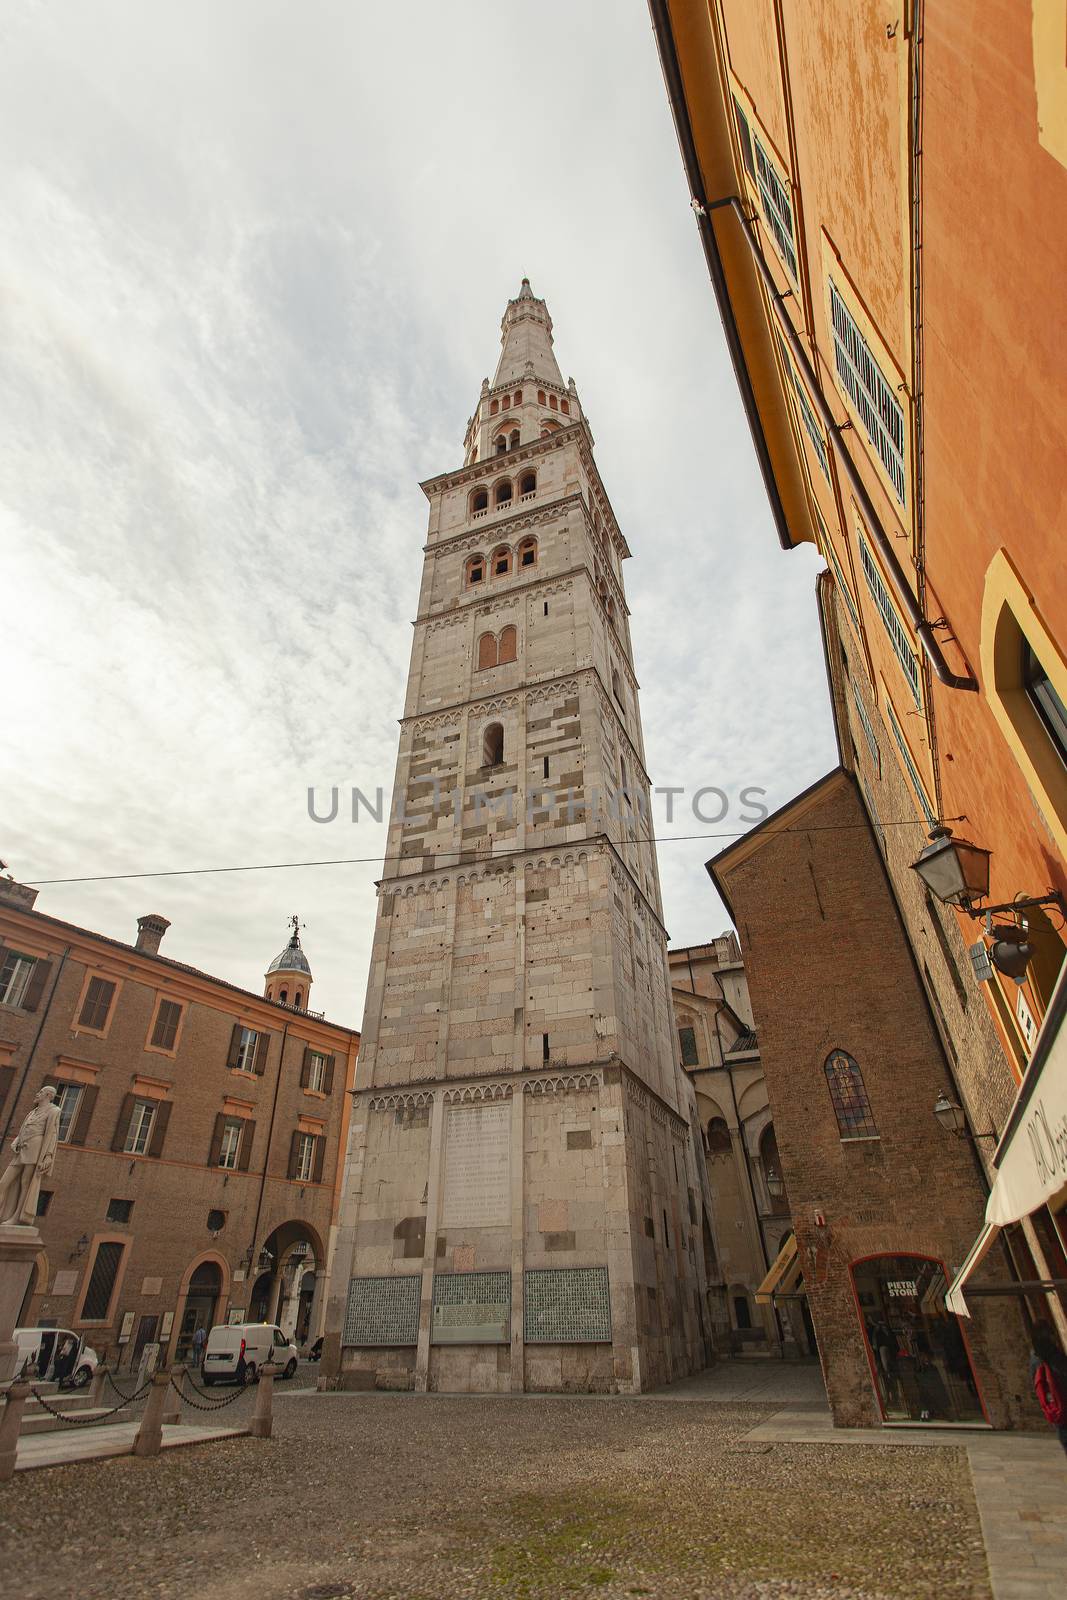 Ghirlandina tower detail in Modena by pippocarlot